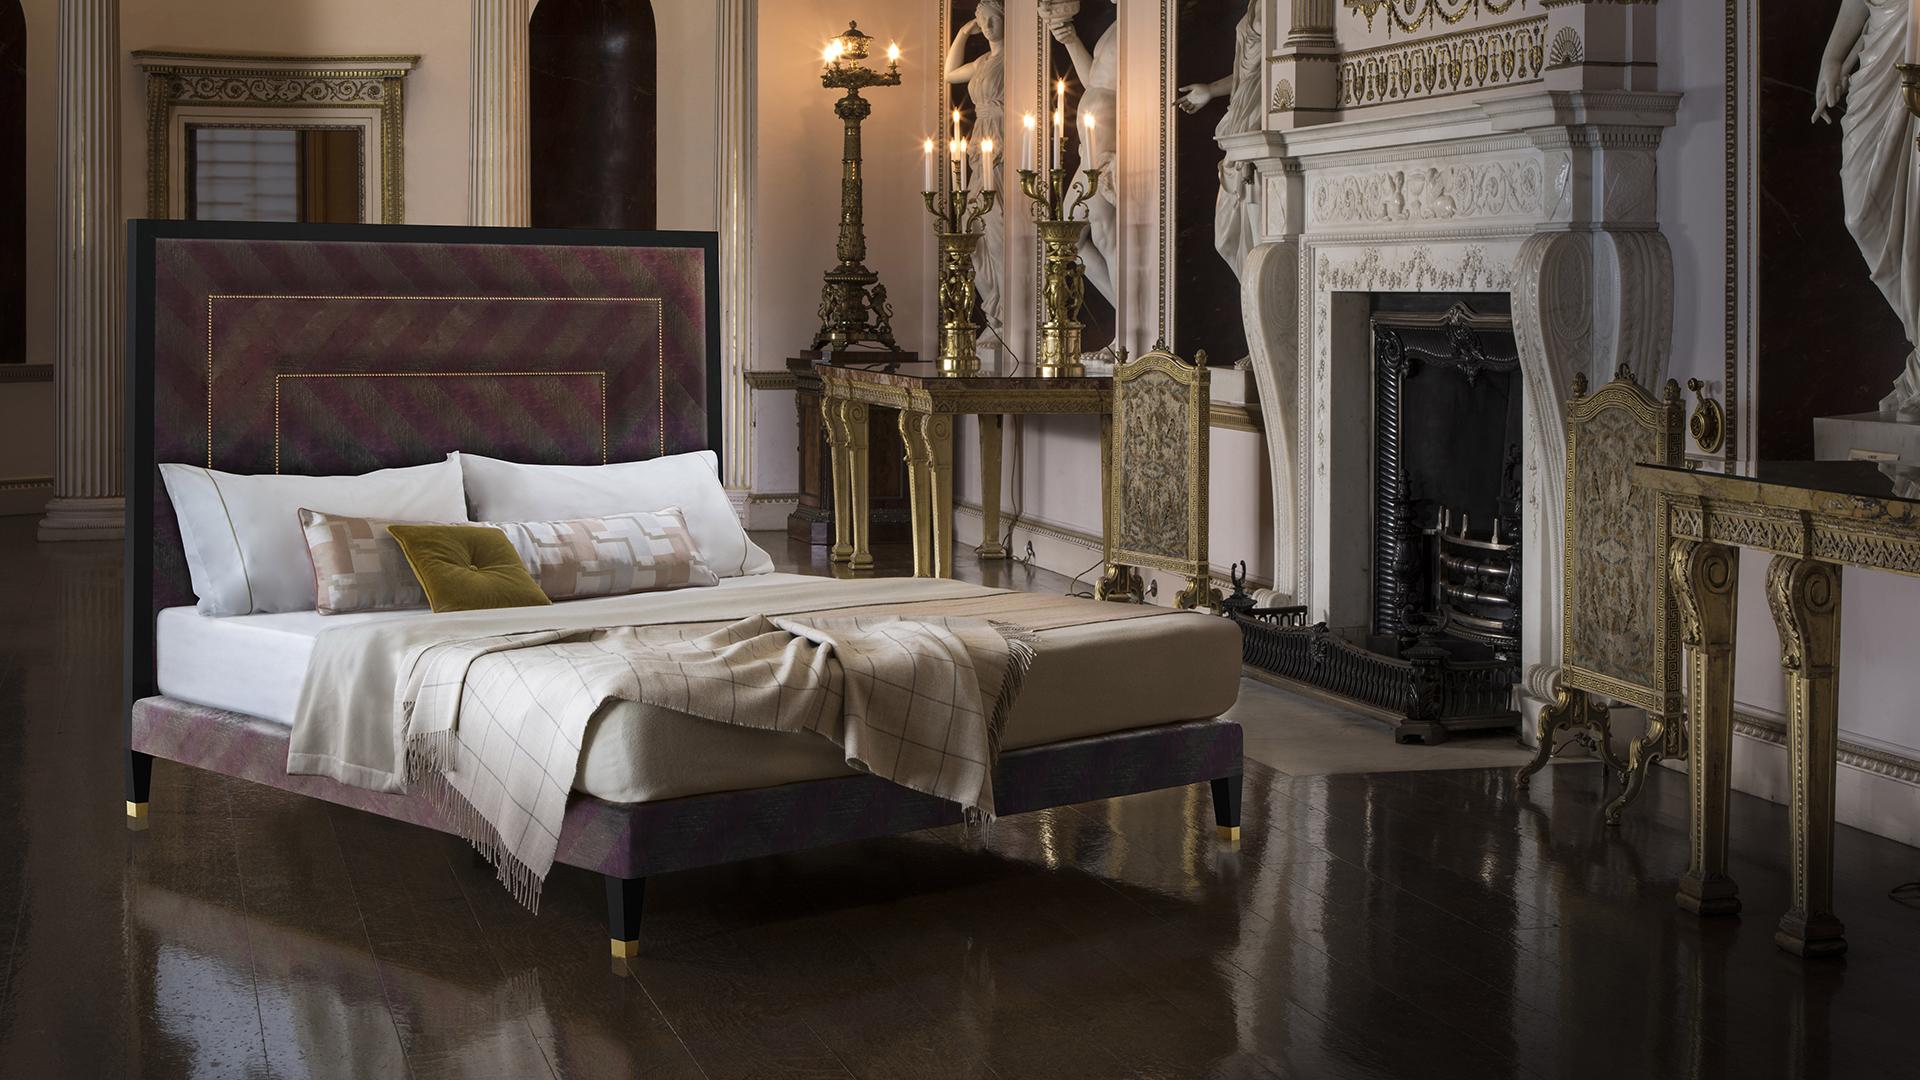 Renowned for his glamourous haute couture collections, Valentin Yudashkin translates his exceptional style to the Stripe bed design, masterfully handcrafted by Savoir’s skilled artisans in 
London. 

With fabric and textile fundamental to his